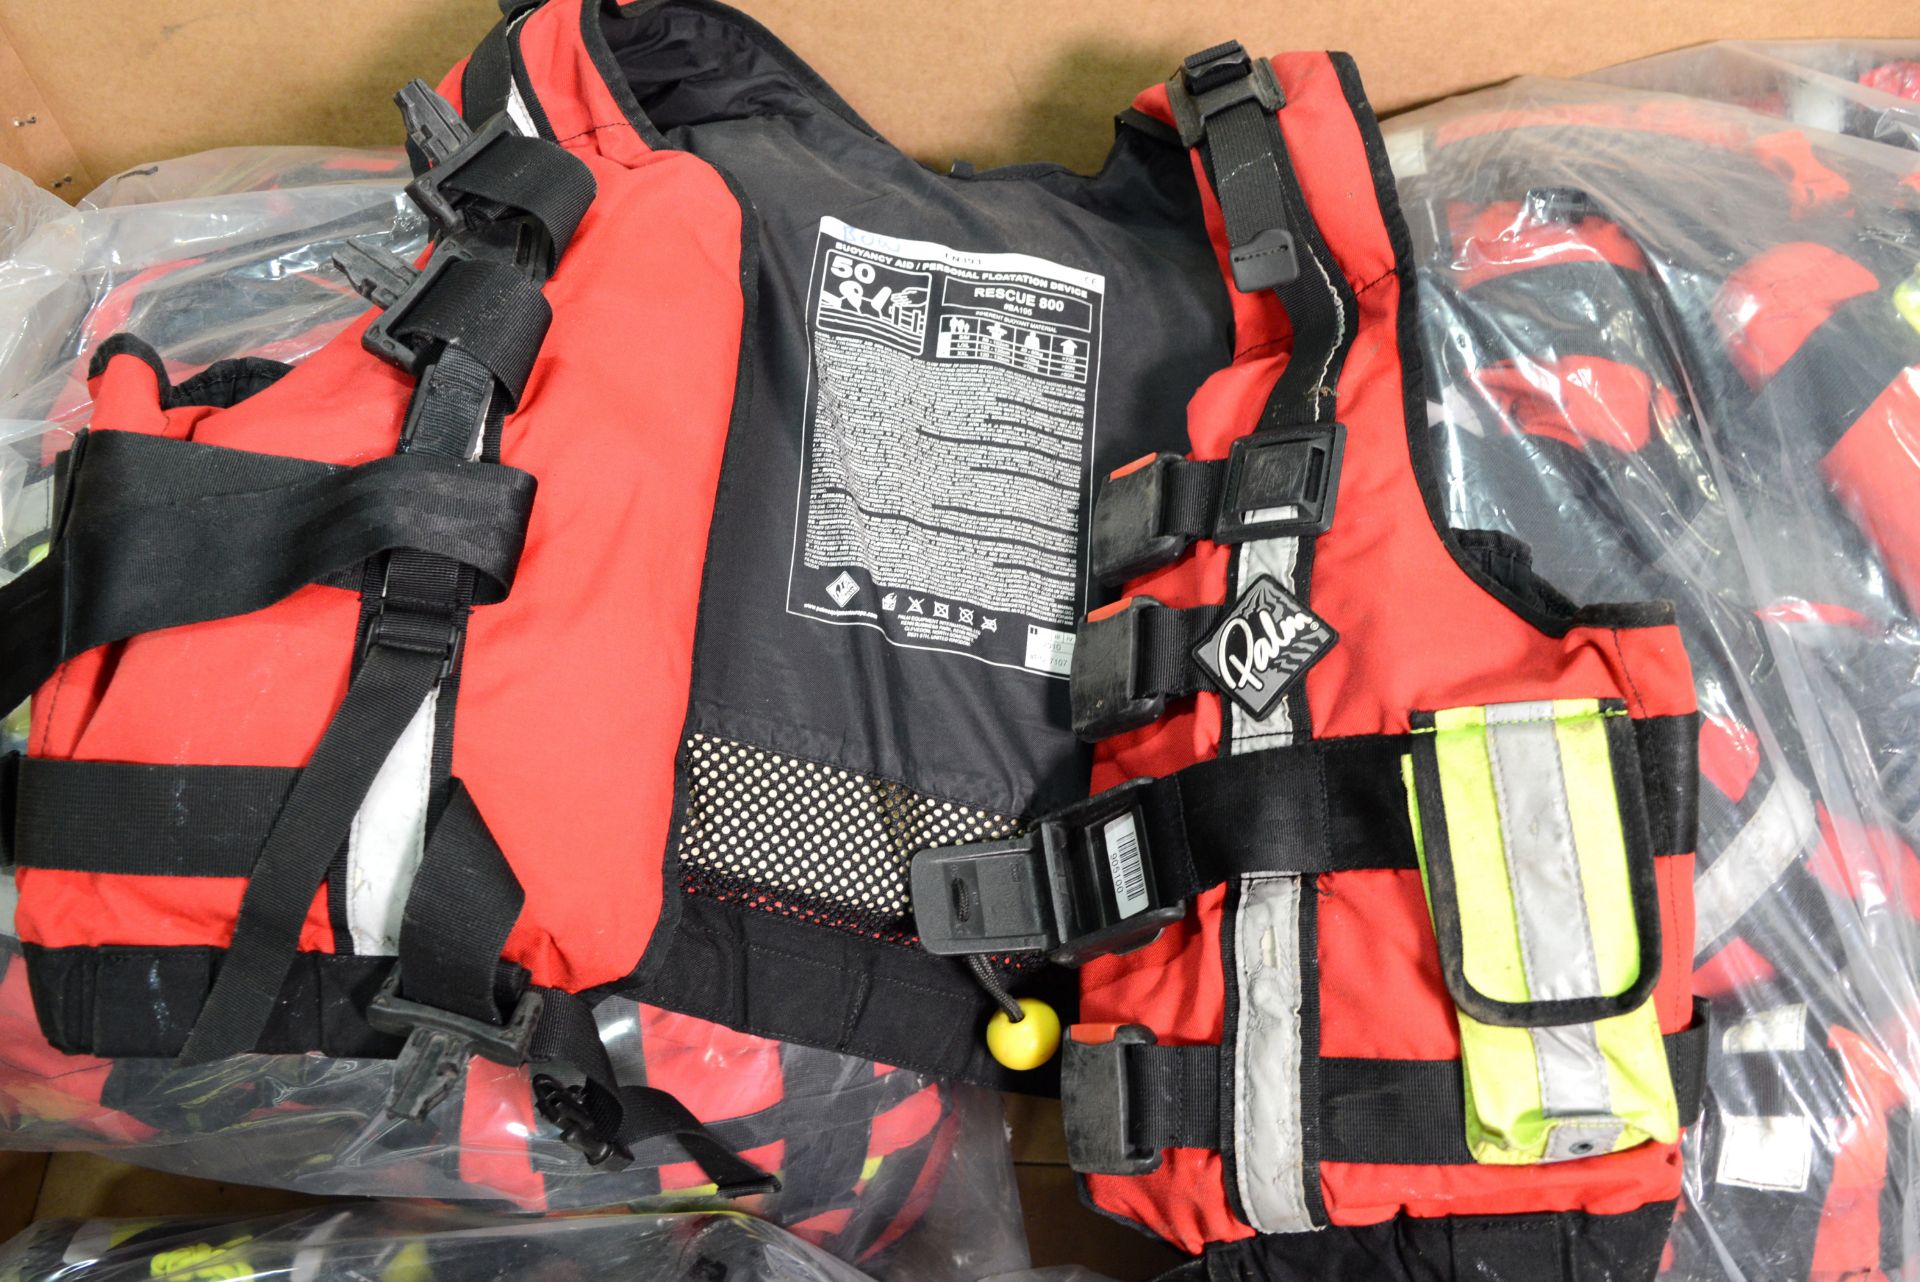 Fire Rescue Textile Equipment - Image 2 of 2